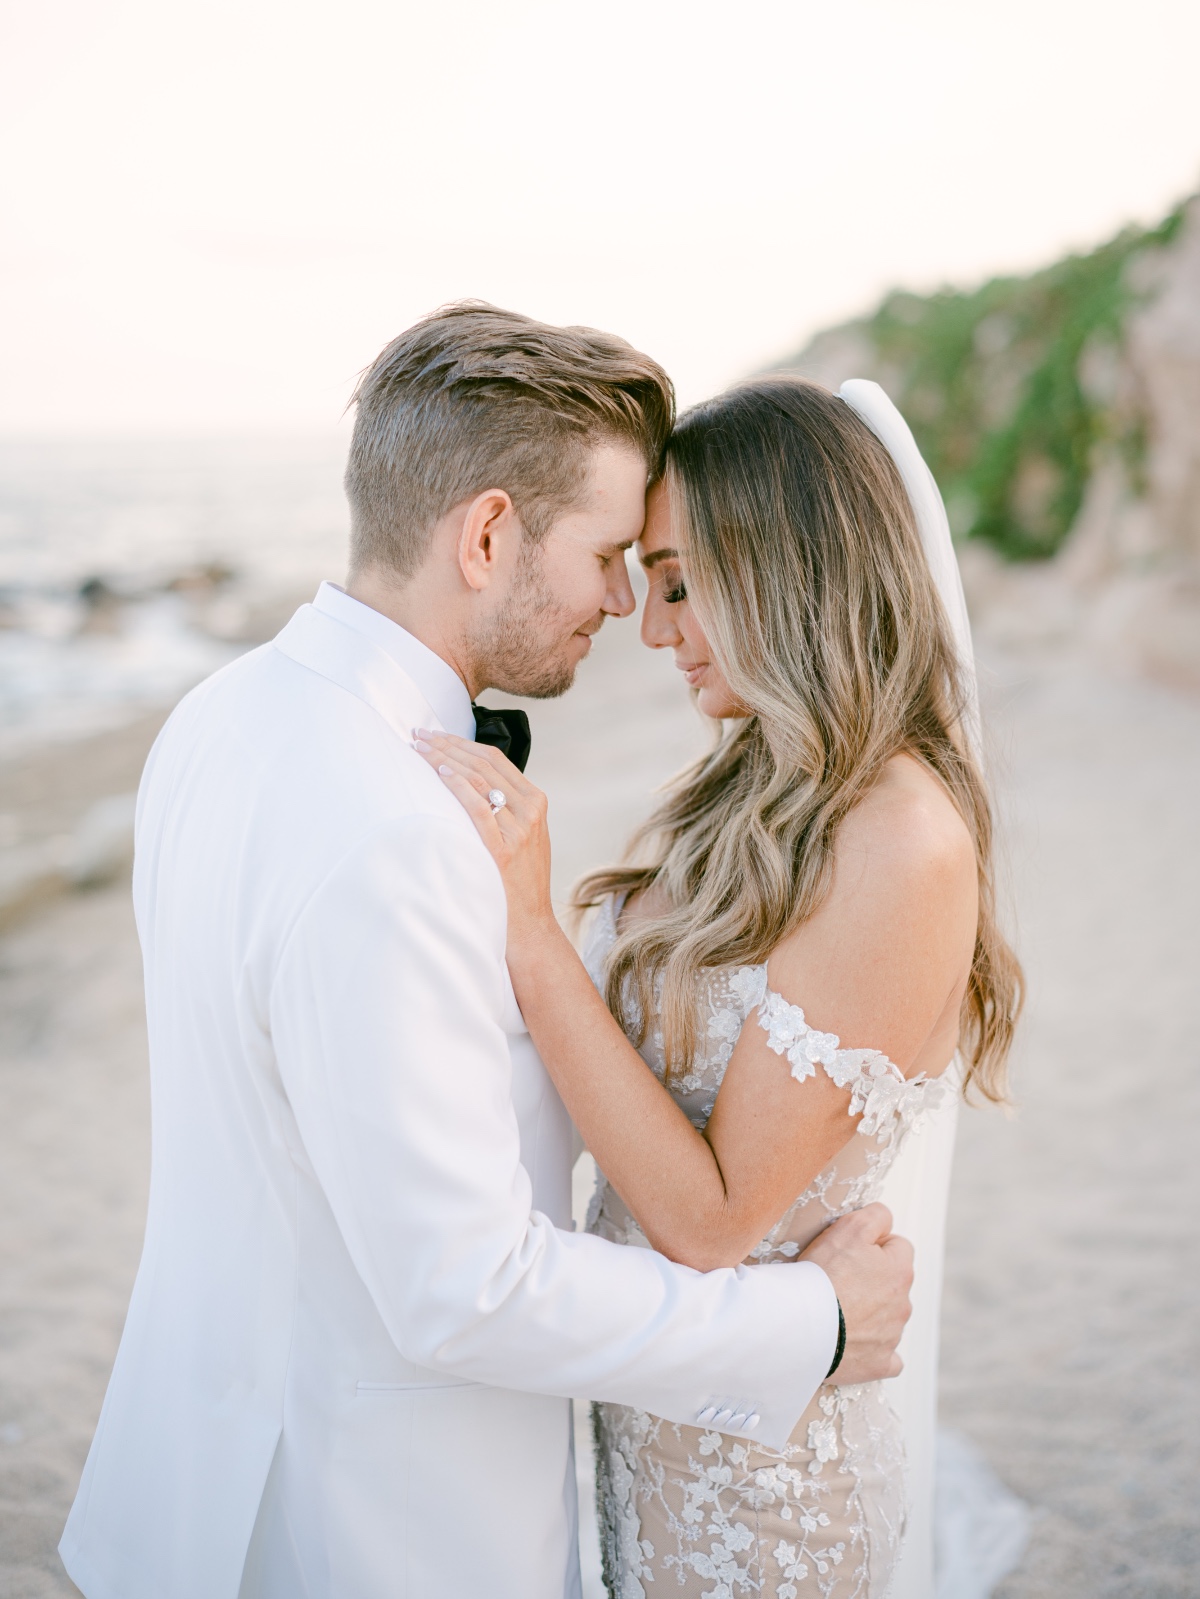 Bride and groom with foreheads touching on beach